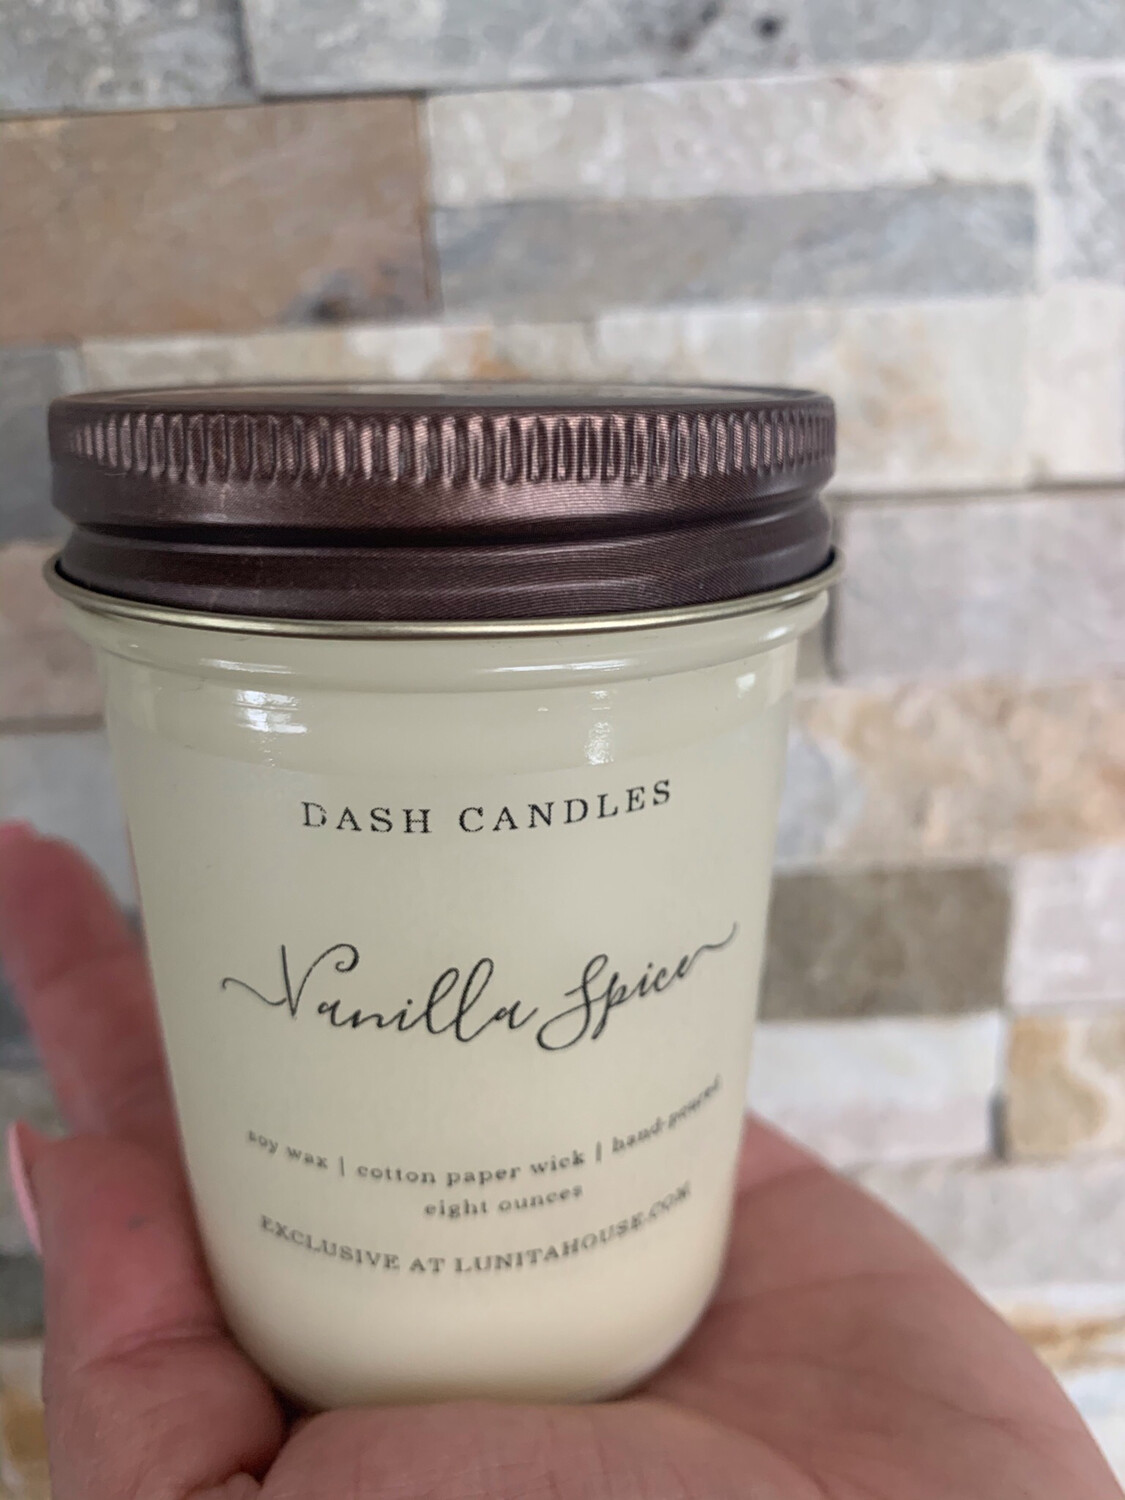 SCENTED CANDLE